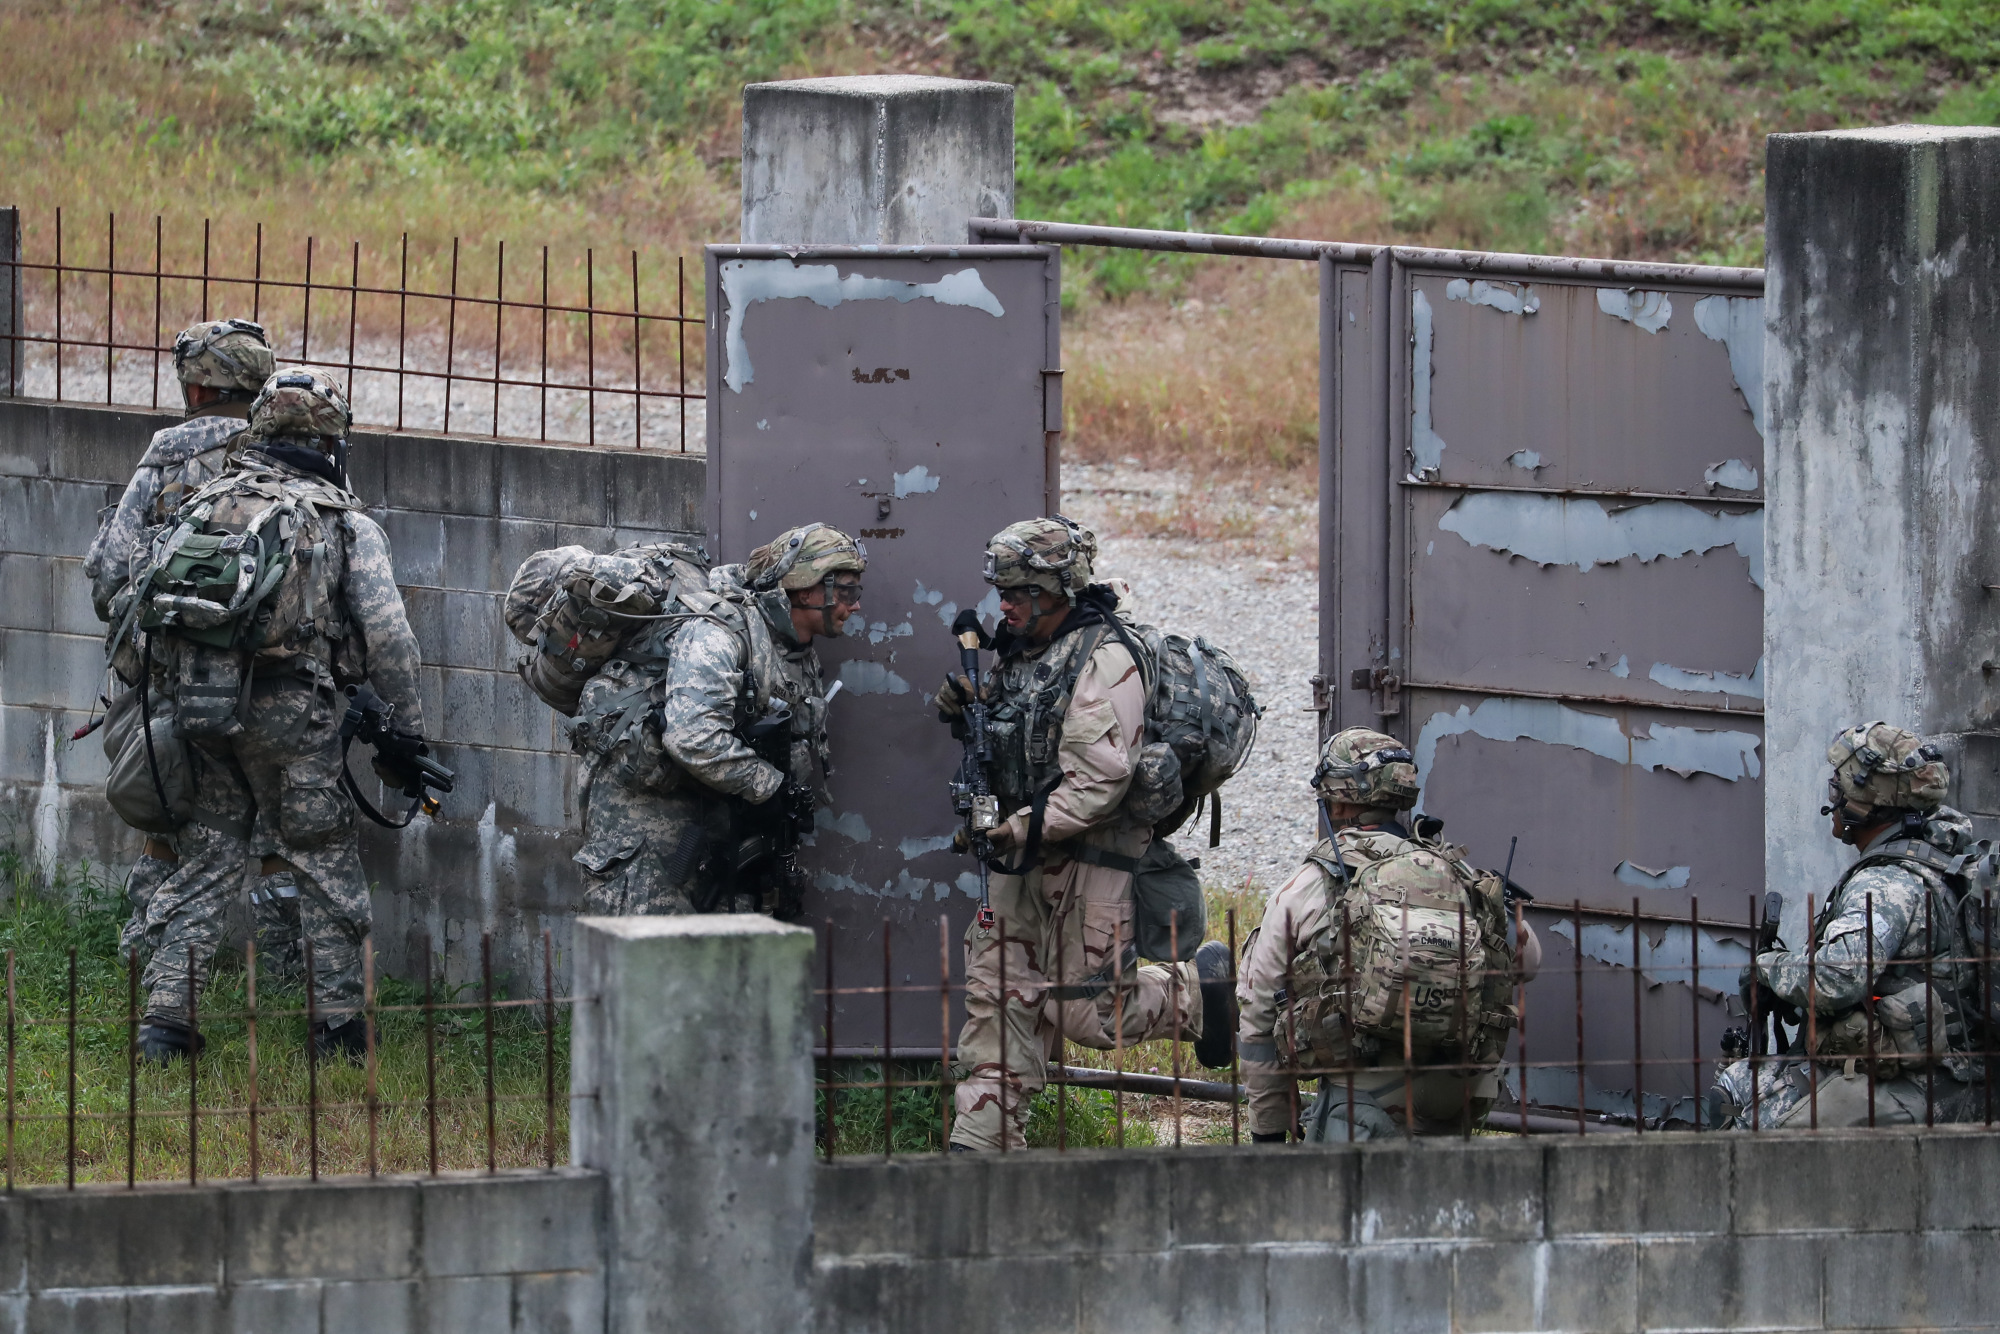 U.S. army soldiers take position behind a wall during Warrior Strike VIII, a bilateral training exercise between the U.S. Army's 2nd Armored Brigade Combat Team, 1st Cavalry Division, and the the South Korean army in Paju, South Korea, on Tuesday, Sept. 19, 2017.&nbsp;